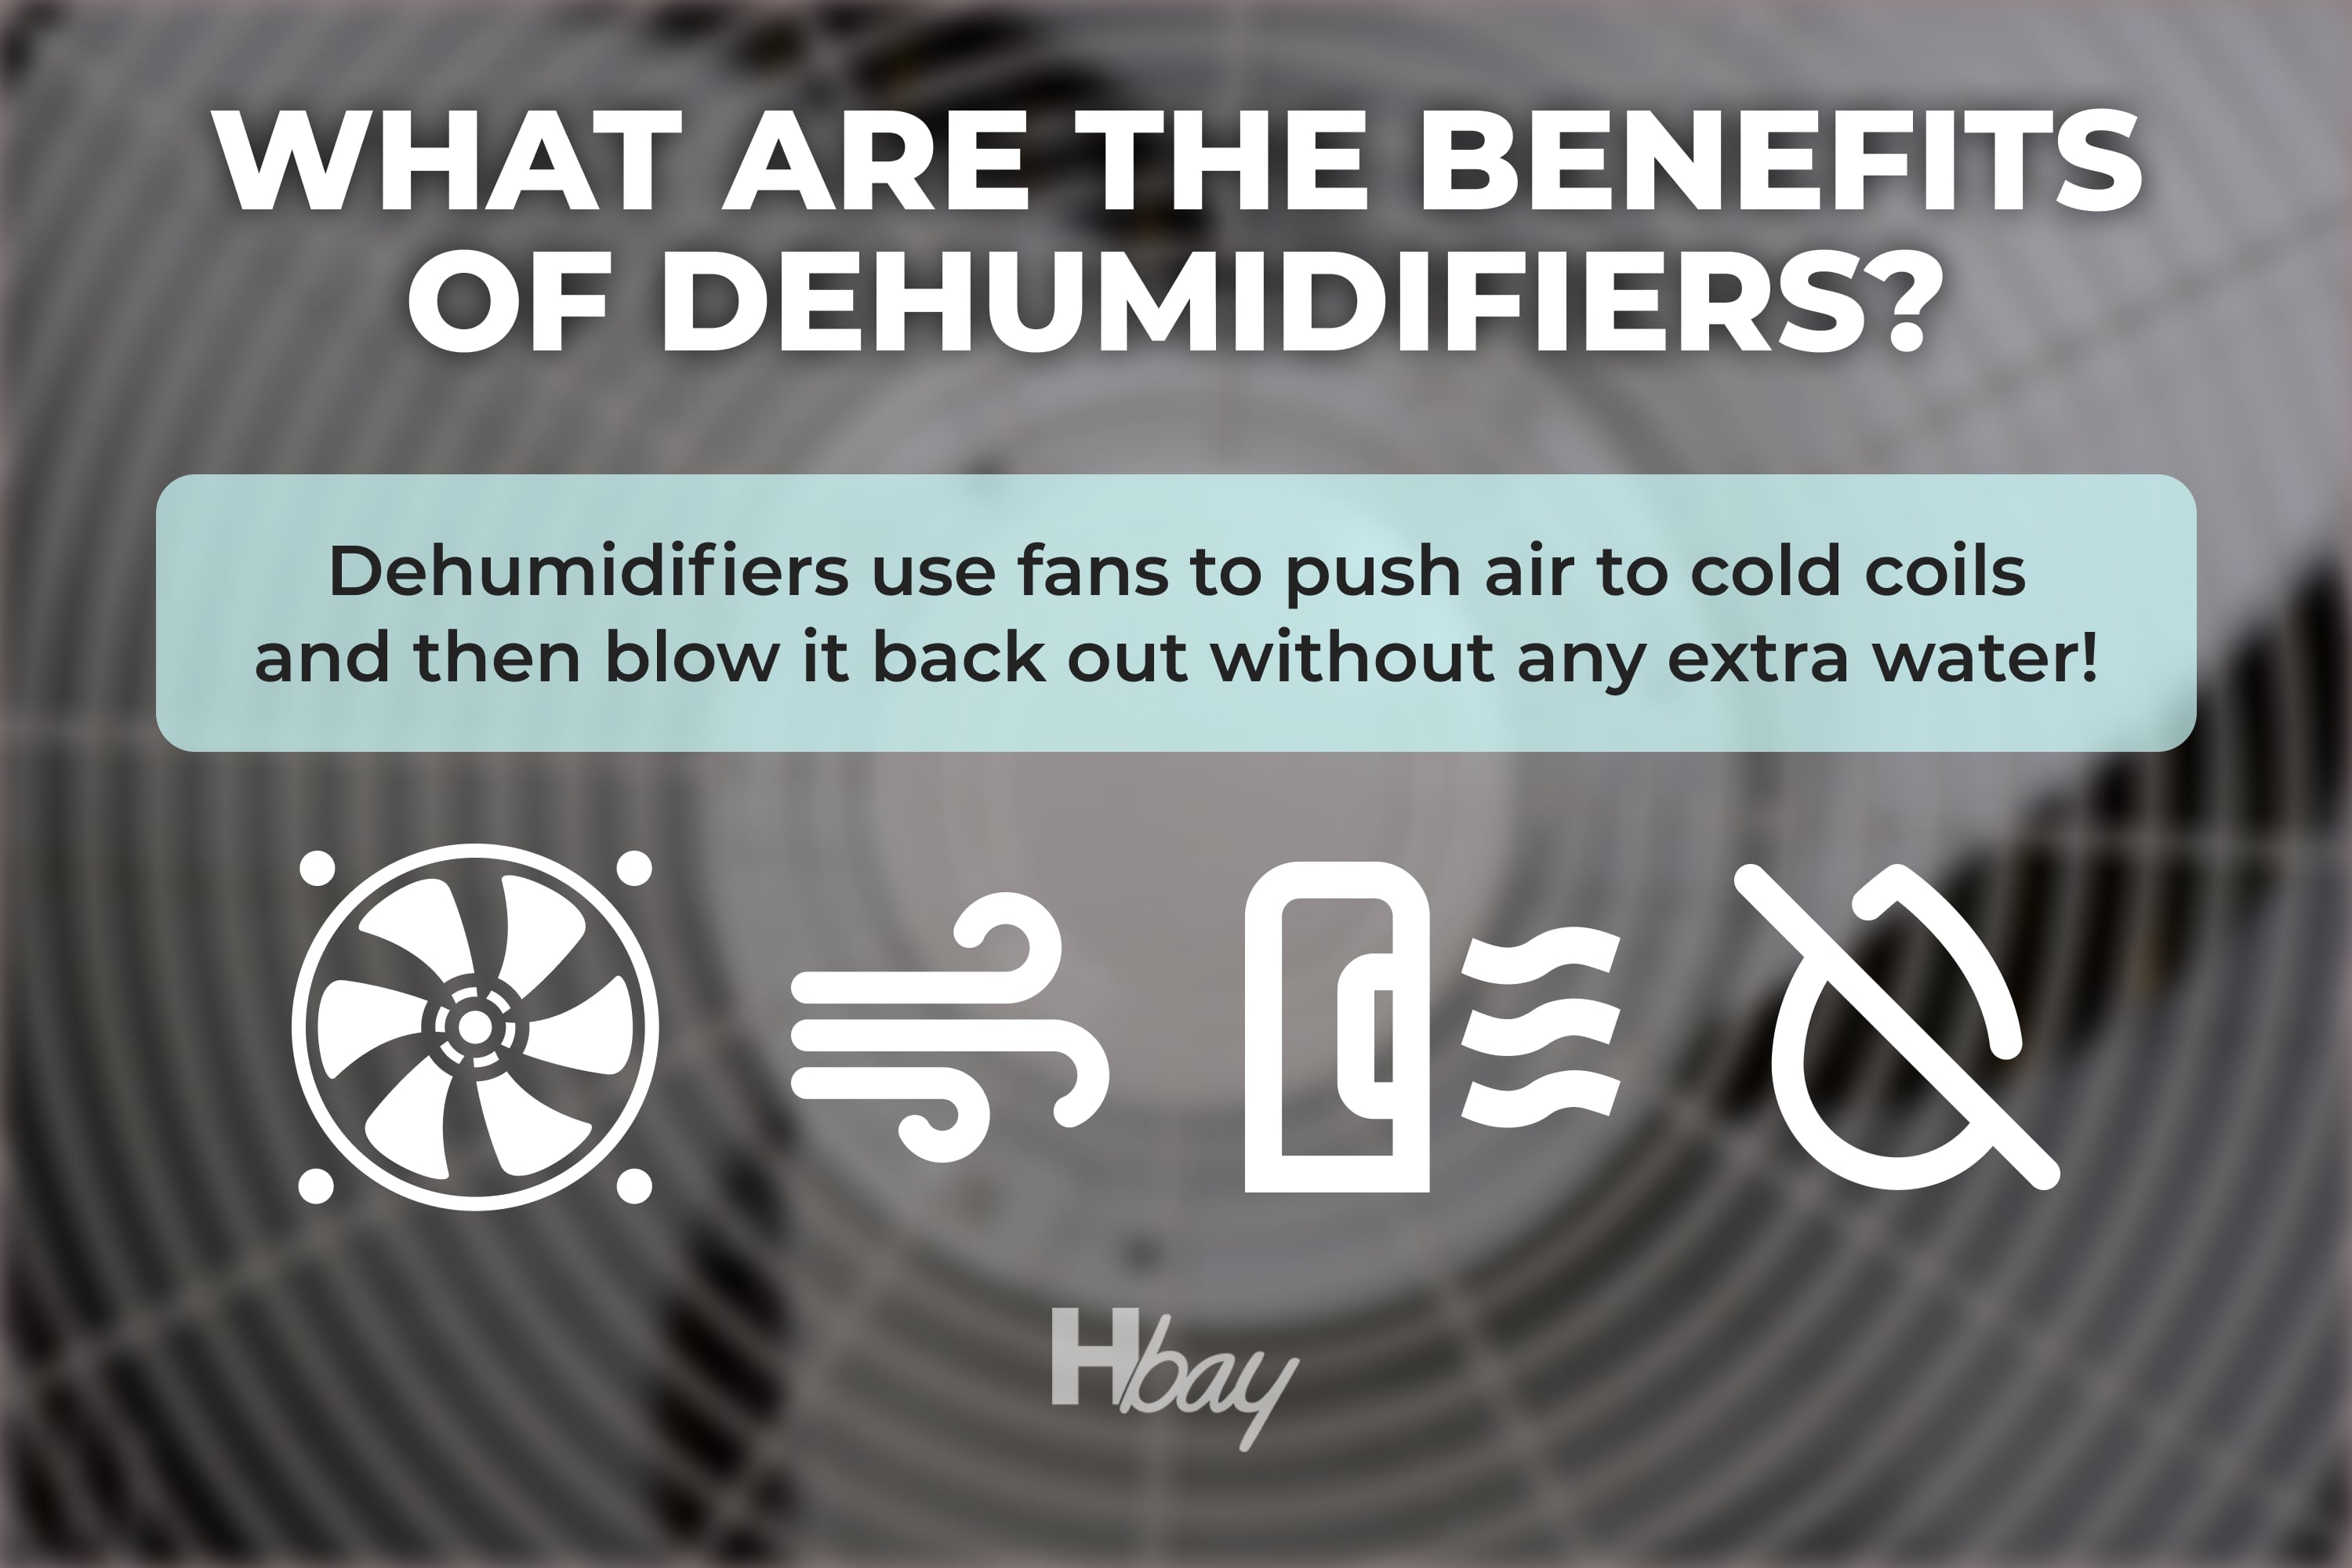 What are the benefits of dehumidifiers